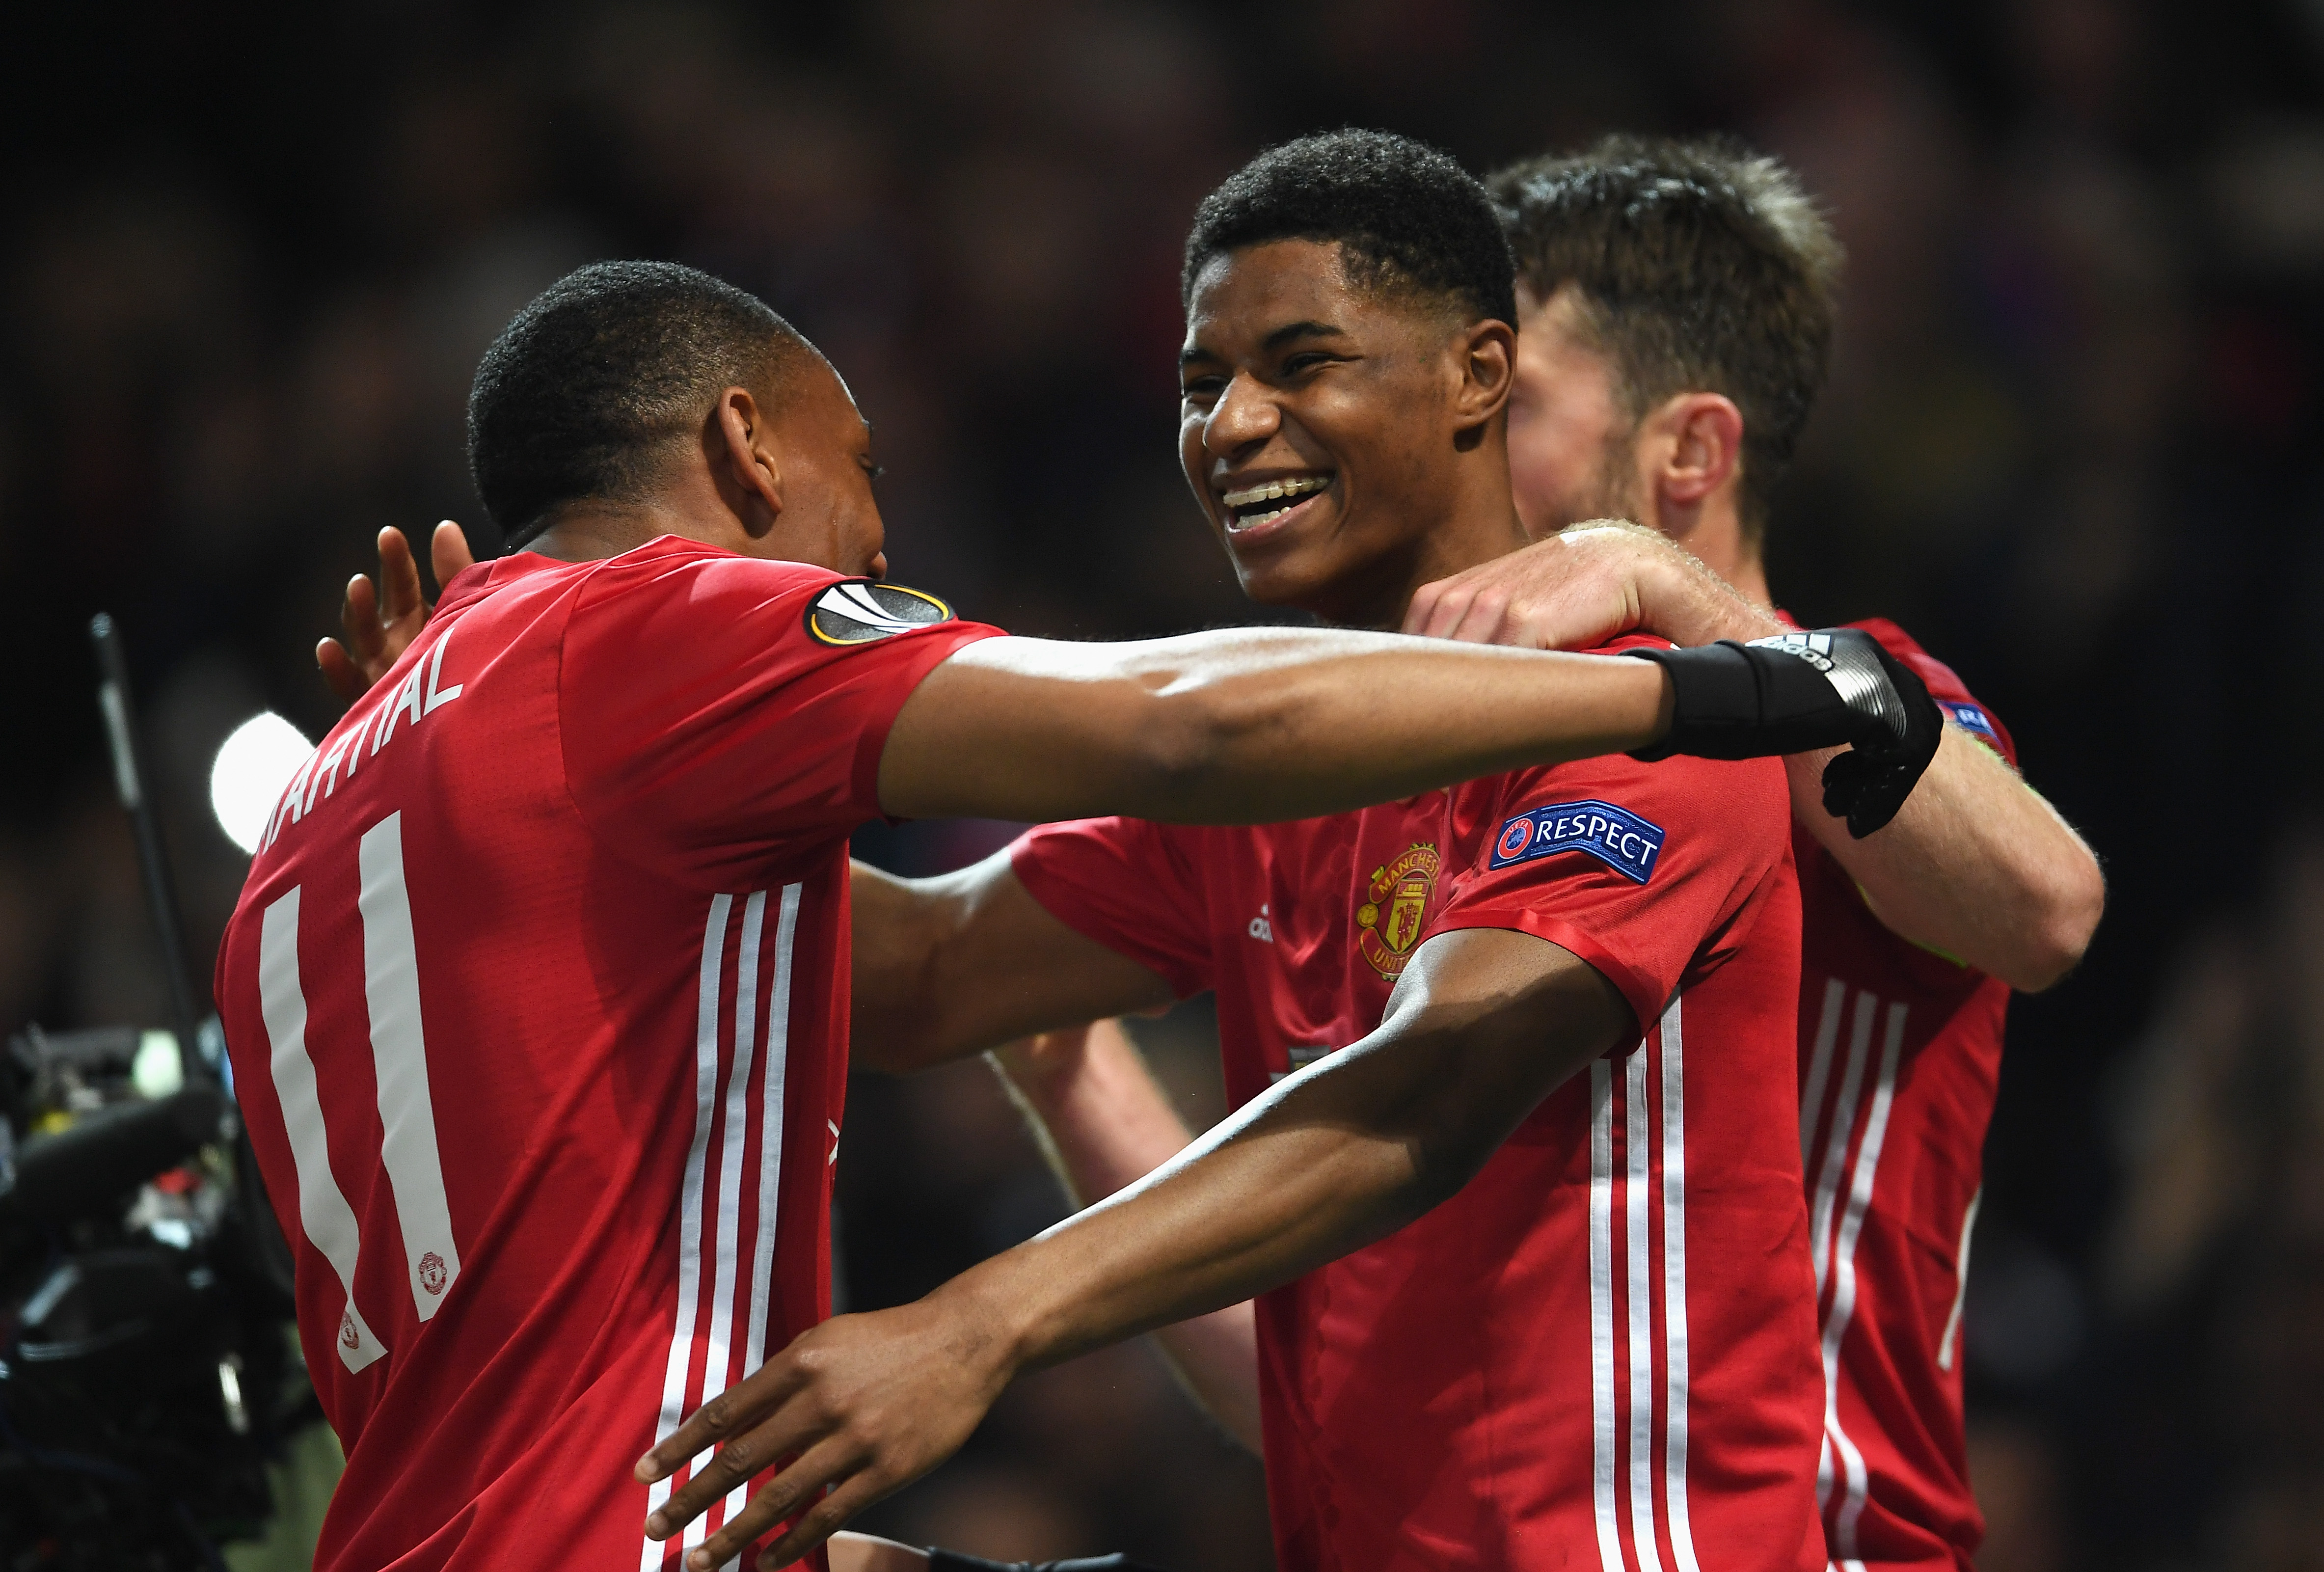 MANCHESTER, ENGLAND - APRIL 20:  Marcus Rashford of Manchester United celebrates with team mates as he scores their second goal during the UEFA Europa League quarter final second leg match between Manchester United and RSC Anderlecht at Old Trafford on April 20, 2017 in Manchester, United Kingdom.  (Photo by Laurence Griffiths/Getty Images)